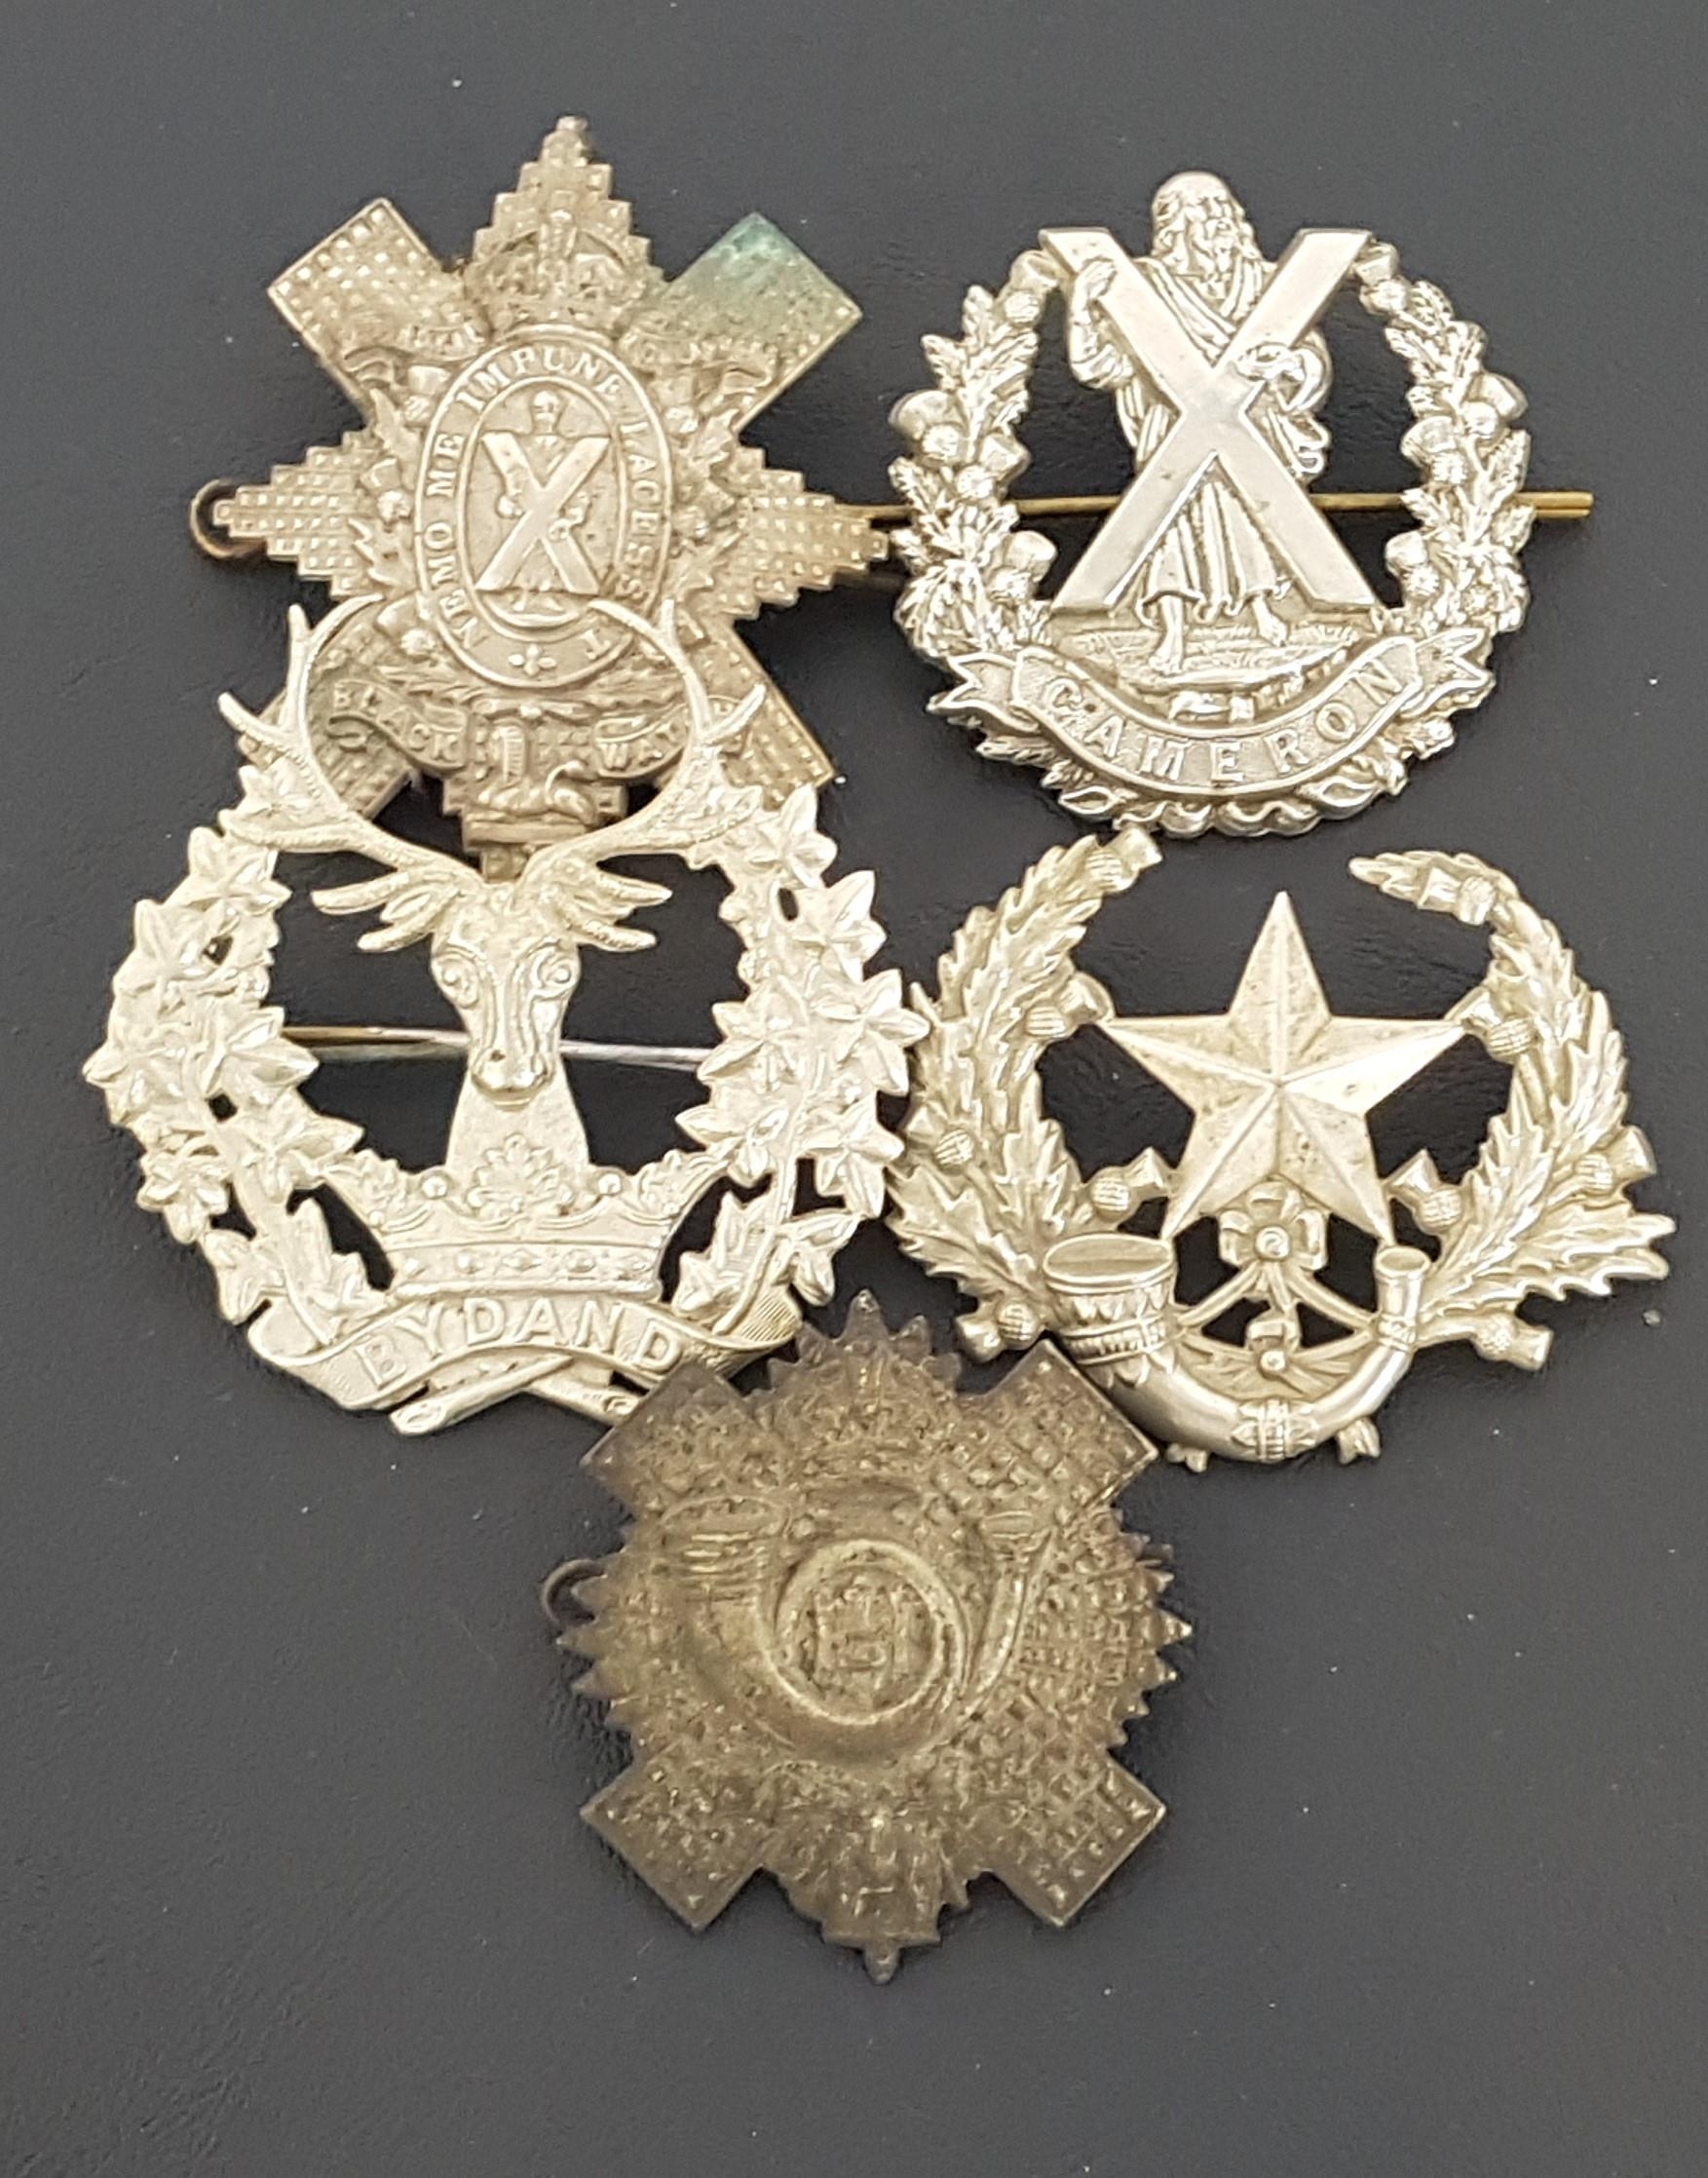 SELECTION OF FIVE METAL MILITARY CAP BADGES including the Cameronians, Cameron Highlanders, Highland